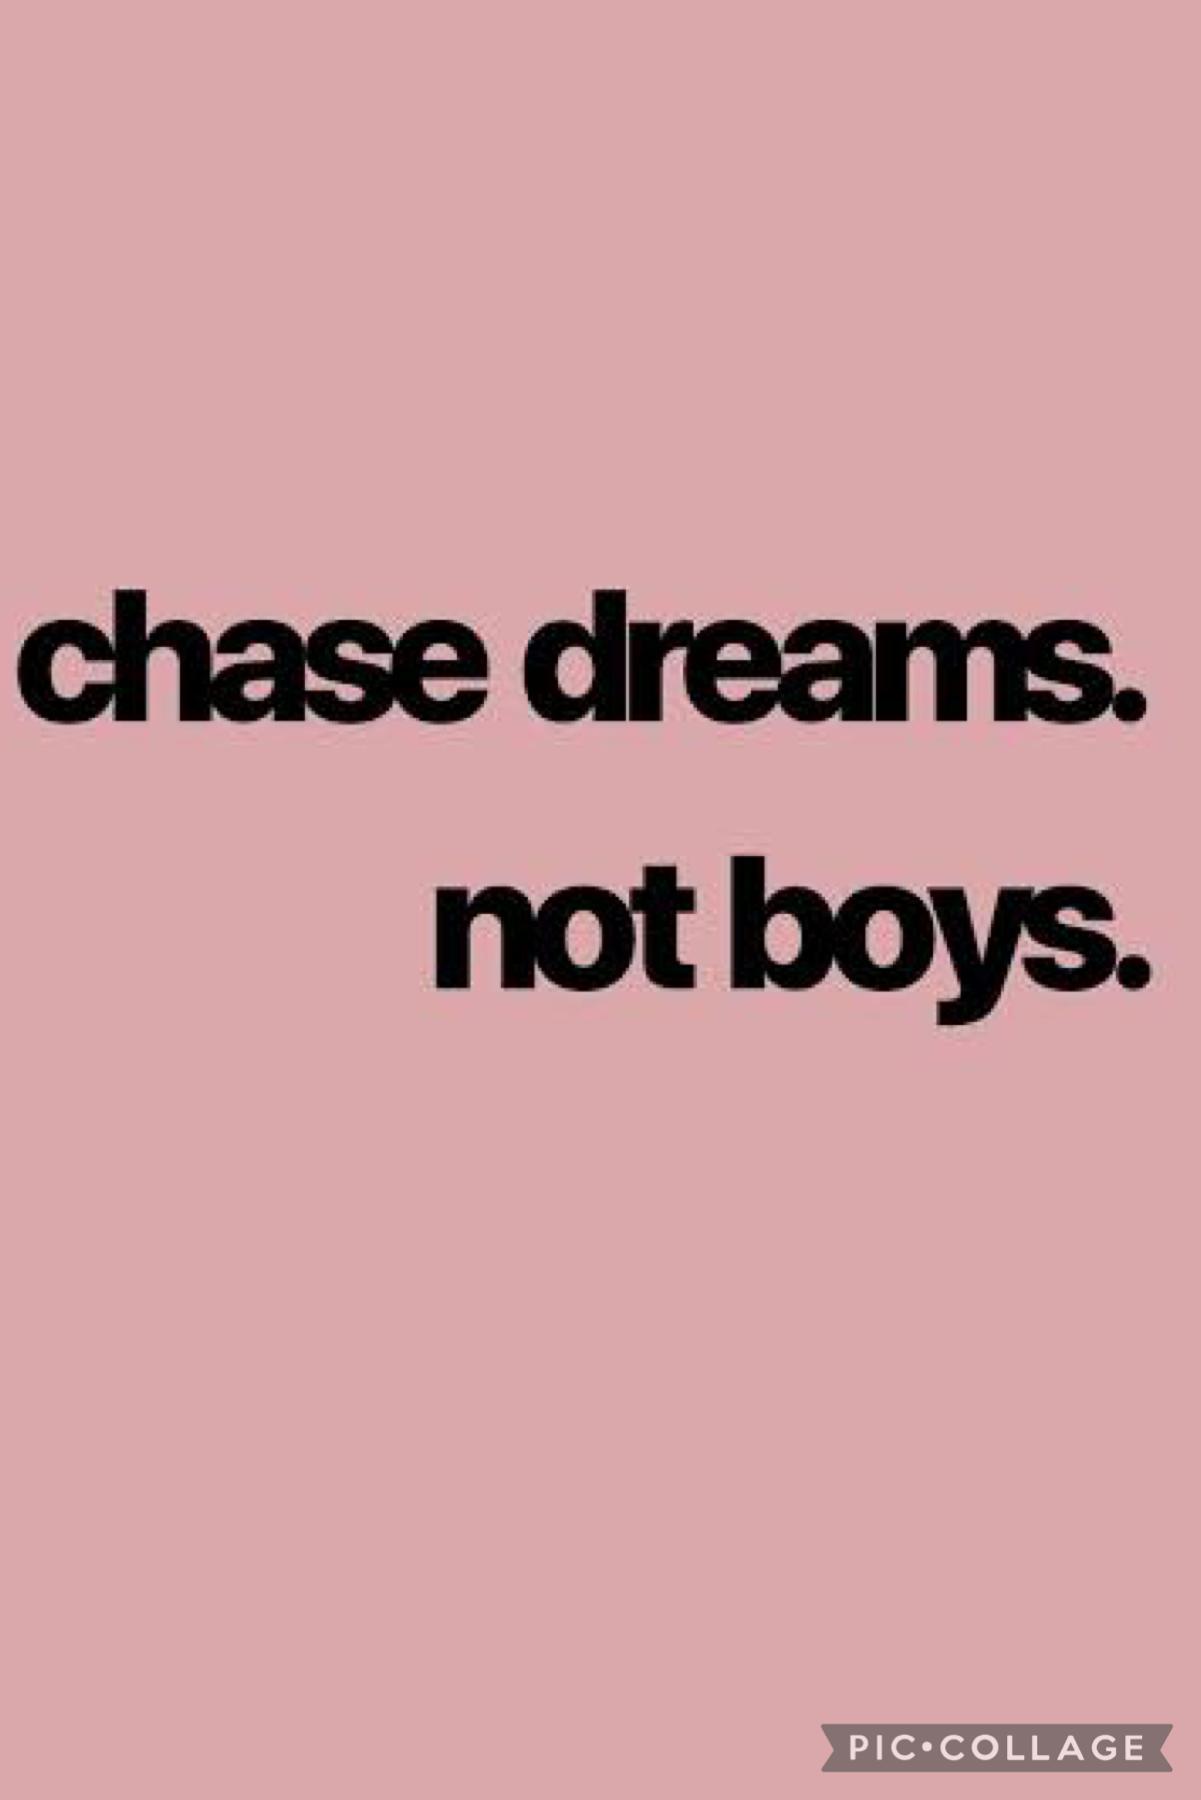 For me it is chase boys not dreams haha